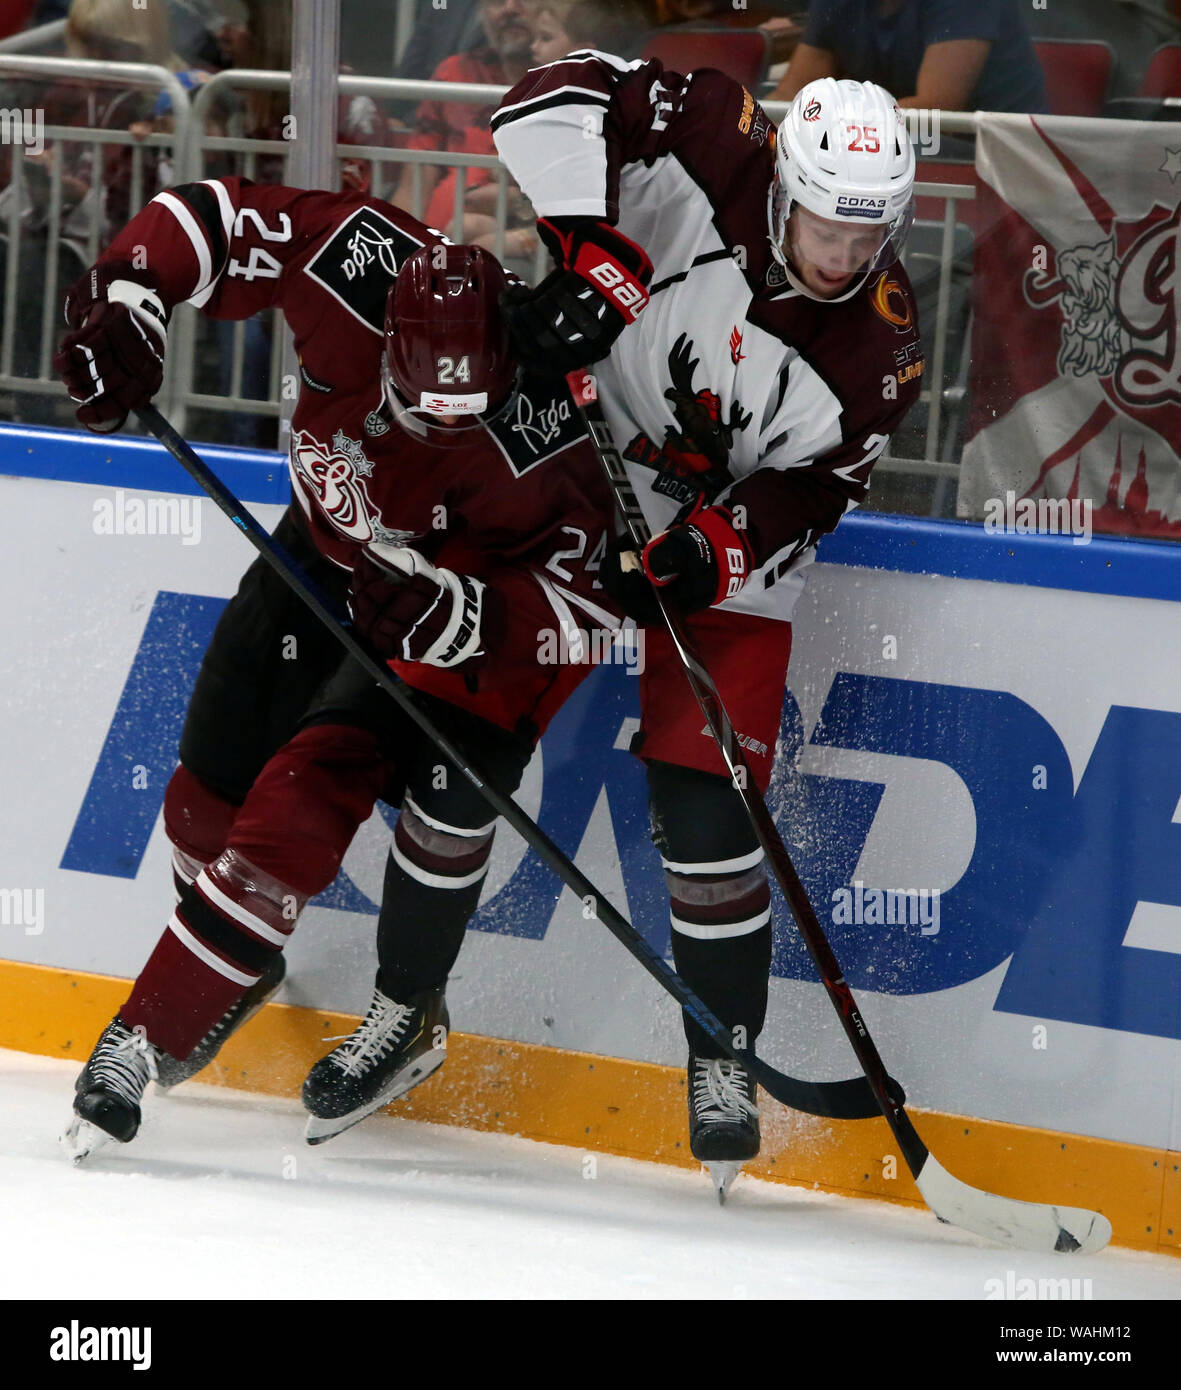 Dinamo Riga High Resolution Stock Photography and Images - Alamy